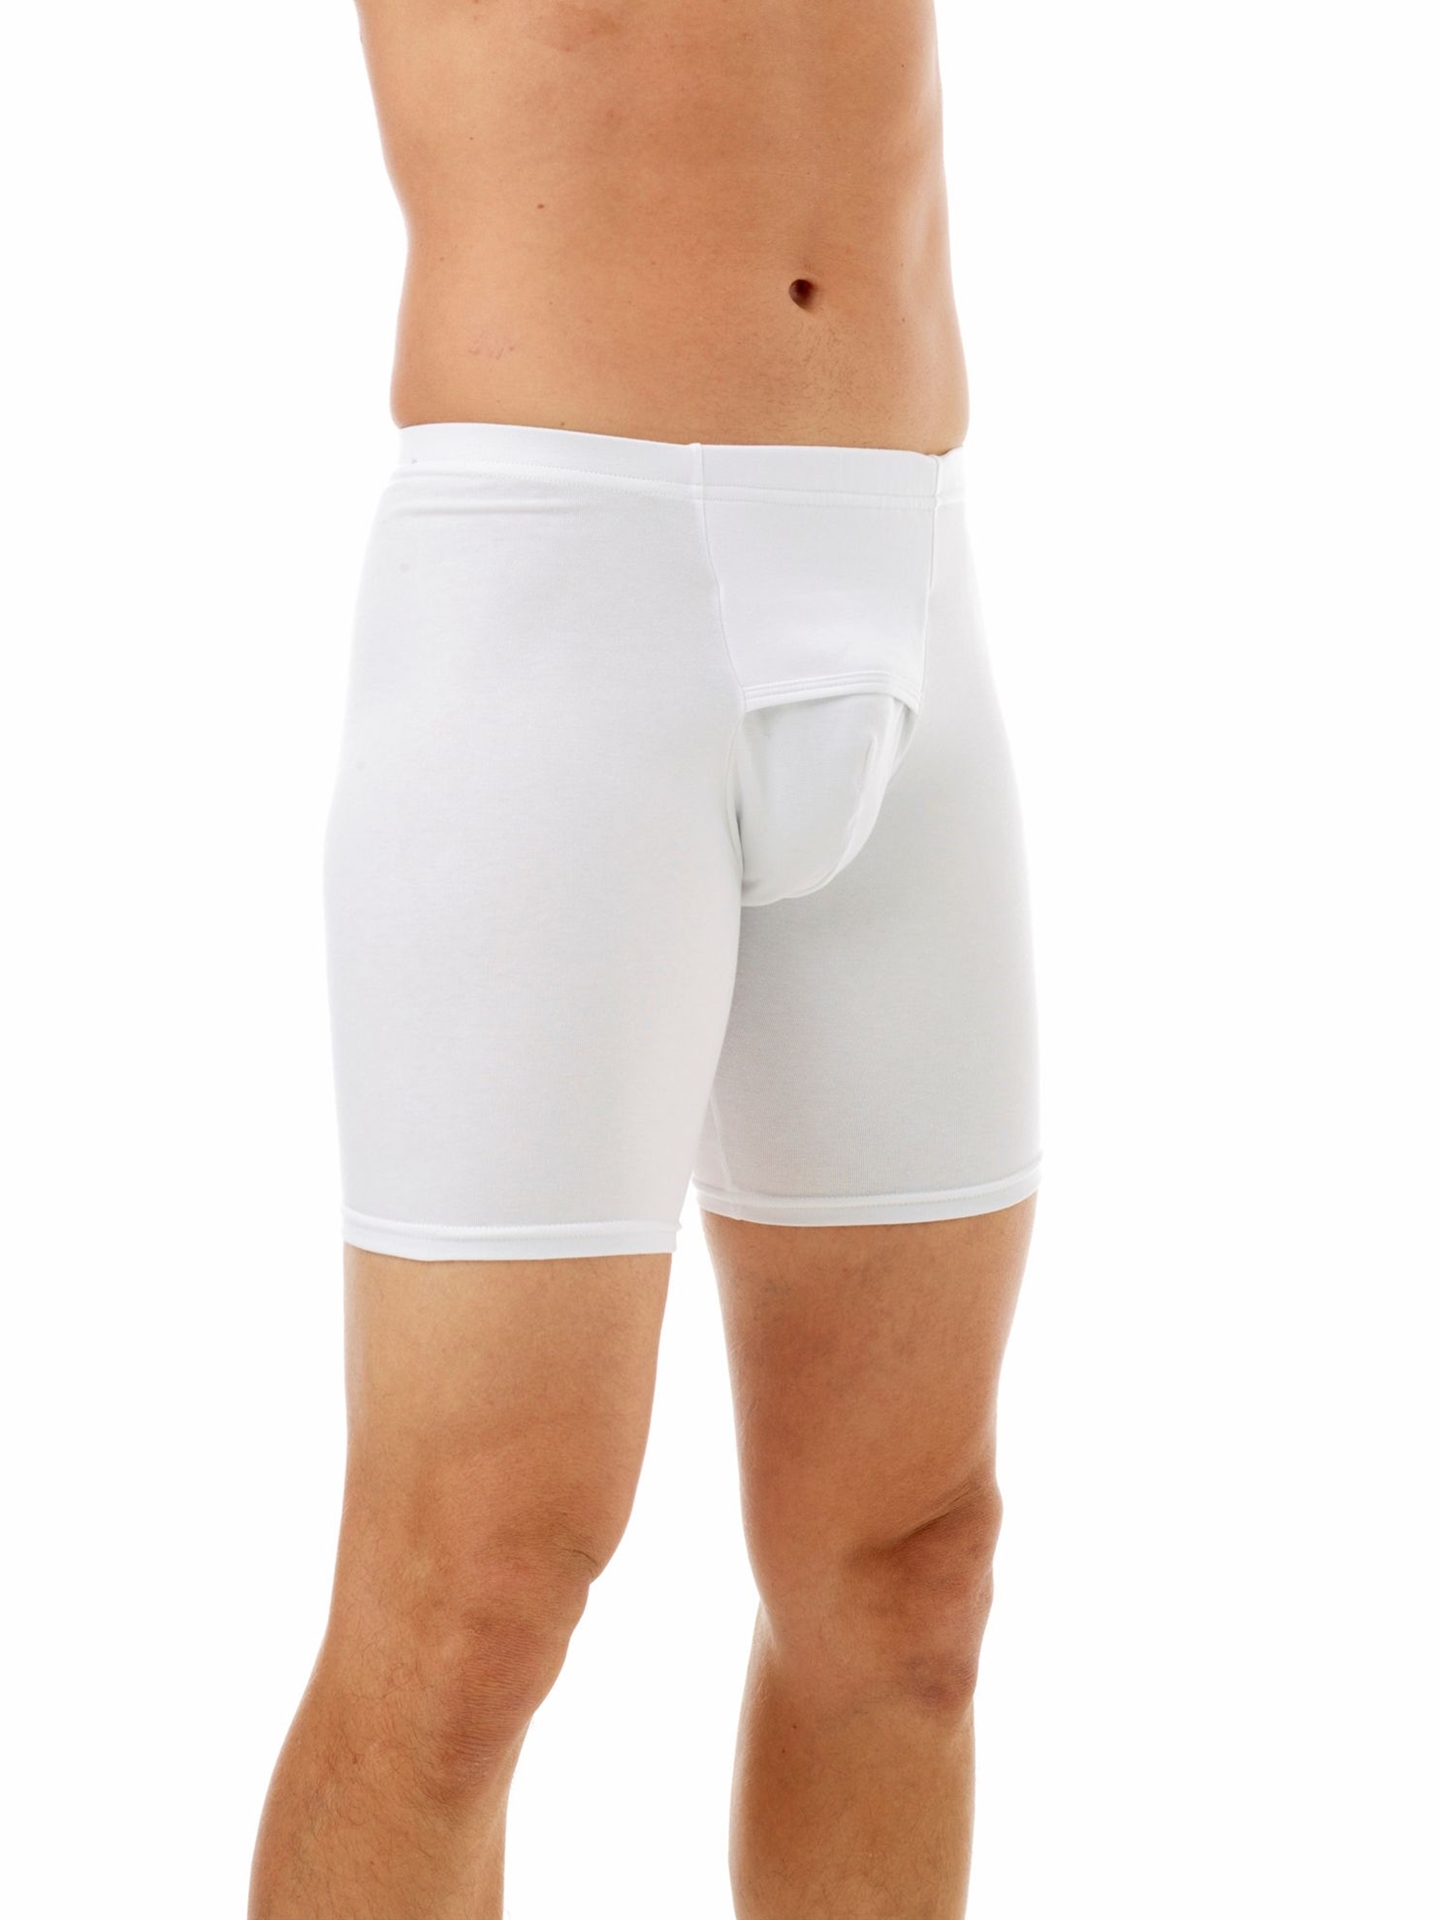 Underworks Women's Cotton Spandex Boxers Bloomers Boyleg Panties 3-Pack  Small White at  Women's Clothing store: Athletic Underwear